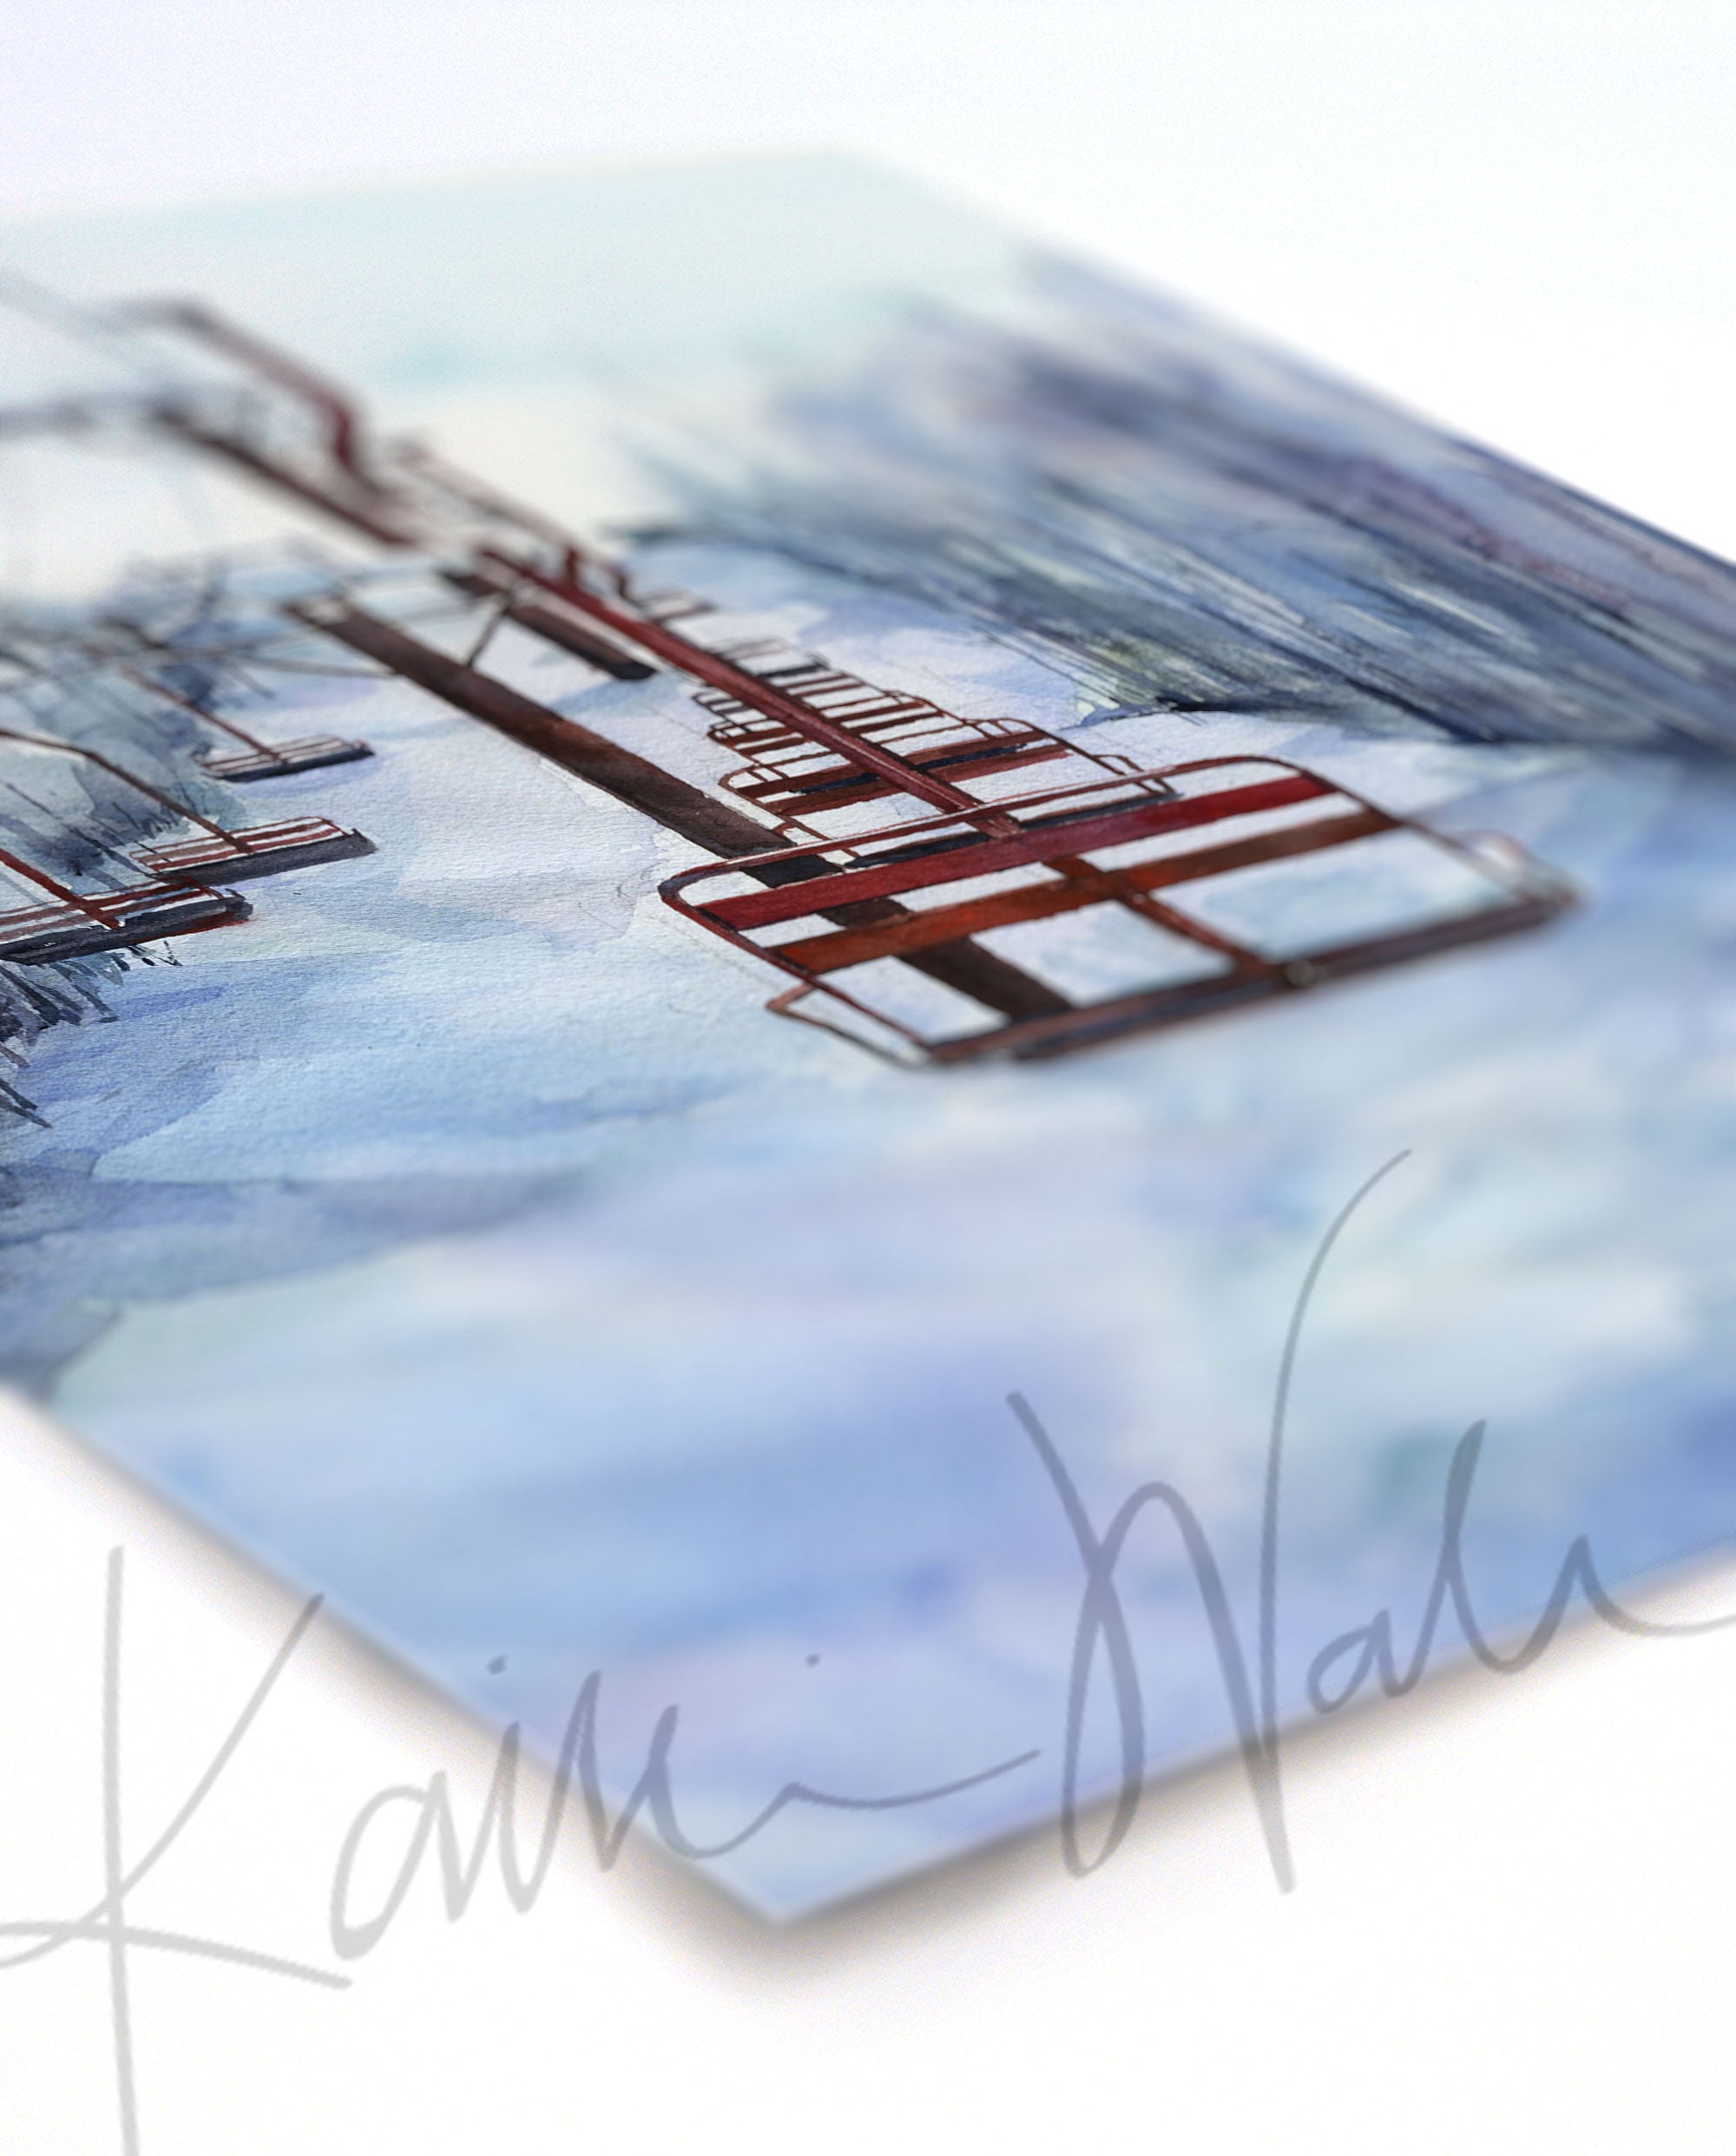 Angled view of a watercolor painting of chairlifts in a snowy scene.